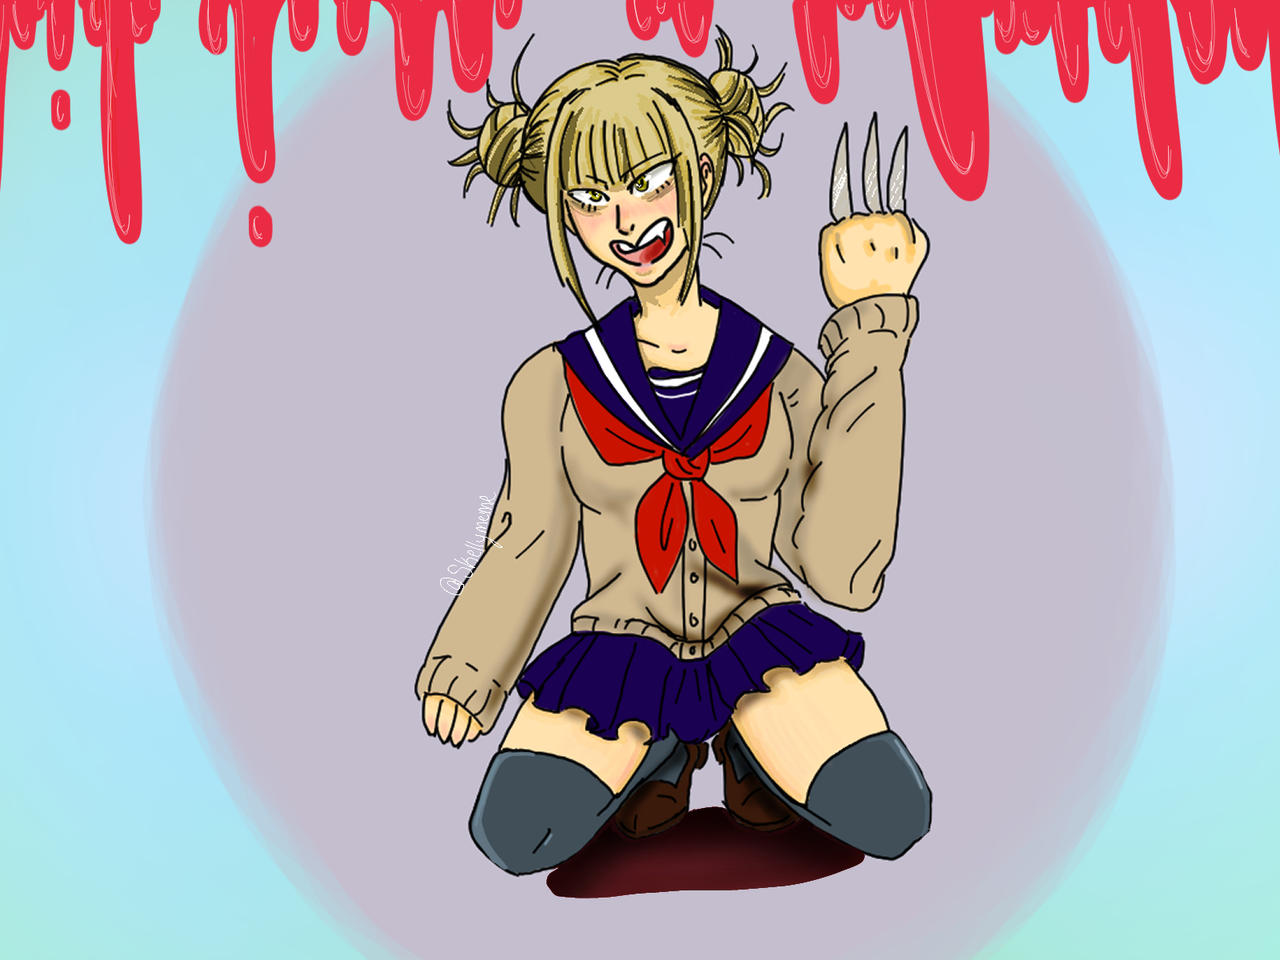 Toga himiko w/ reference by Skellymeme on DeviantArt